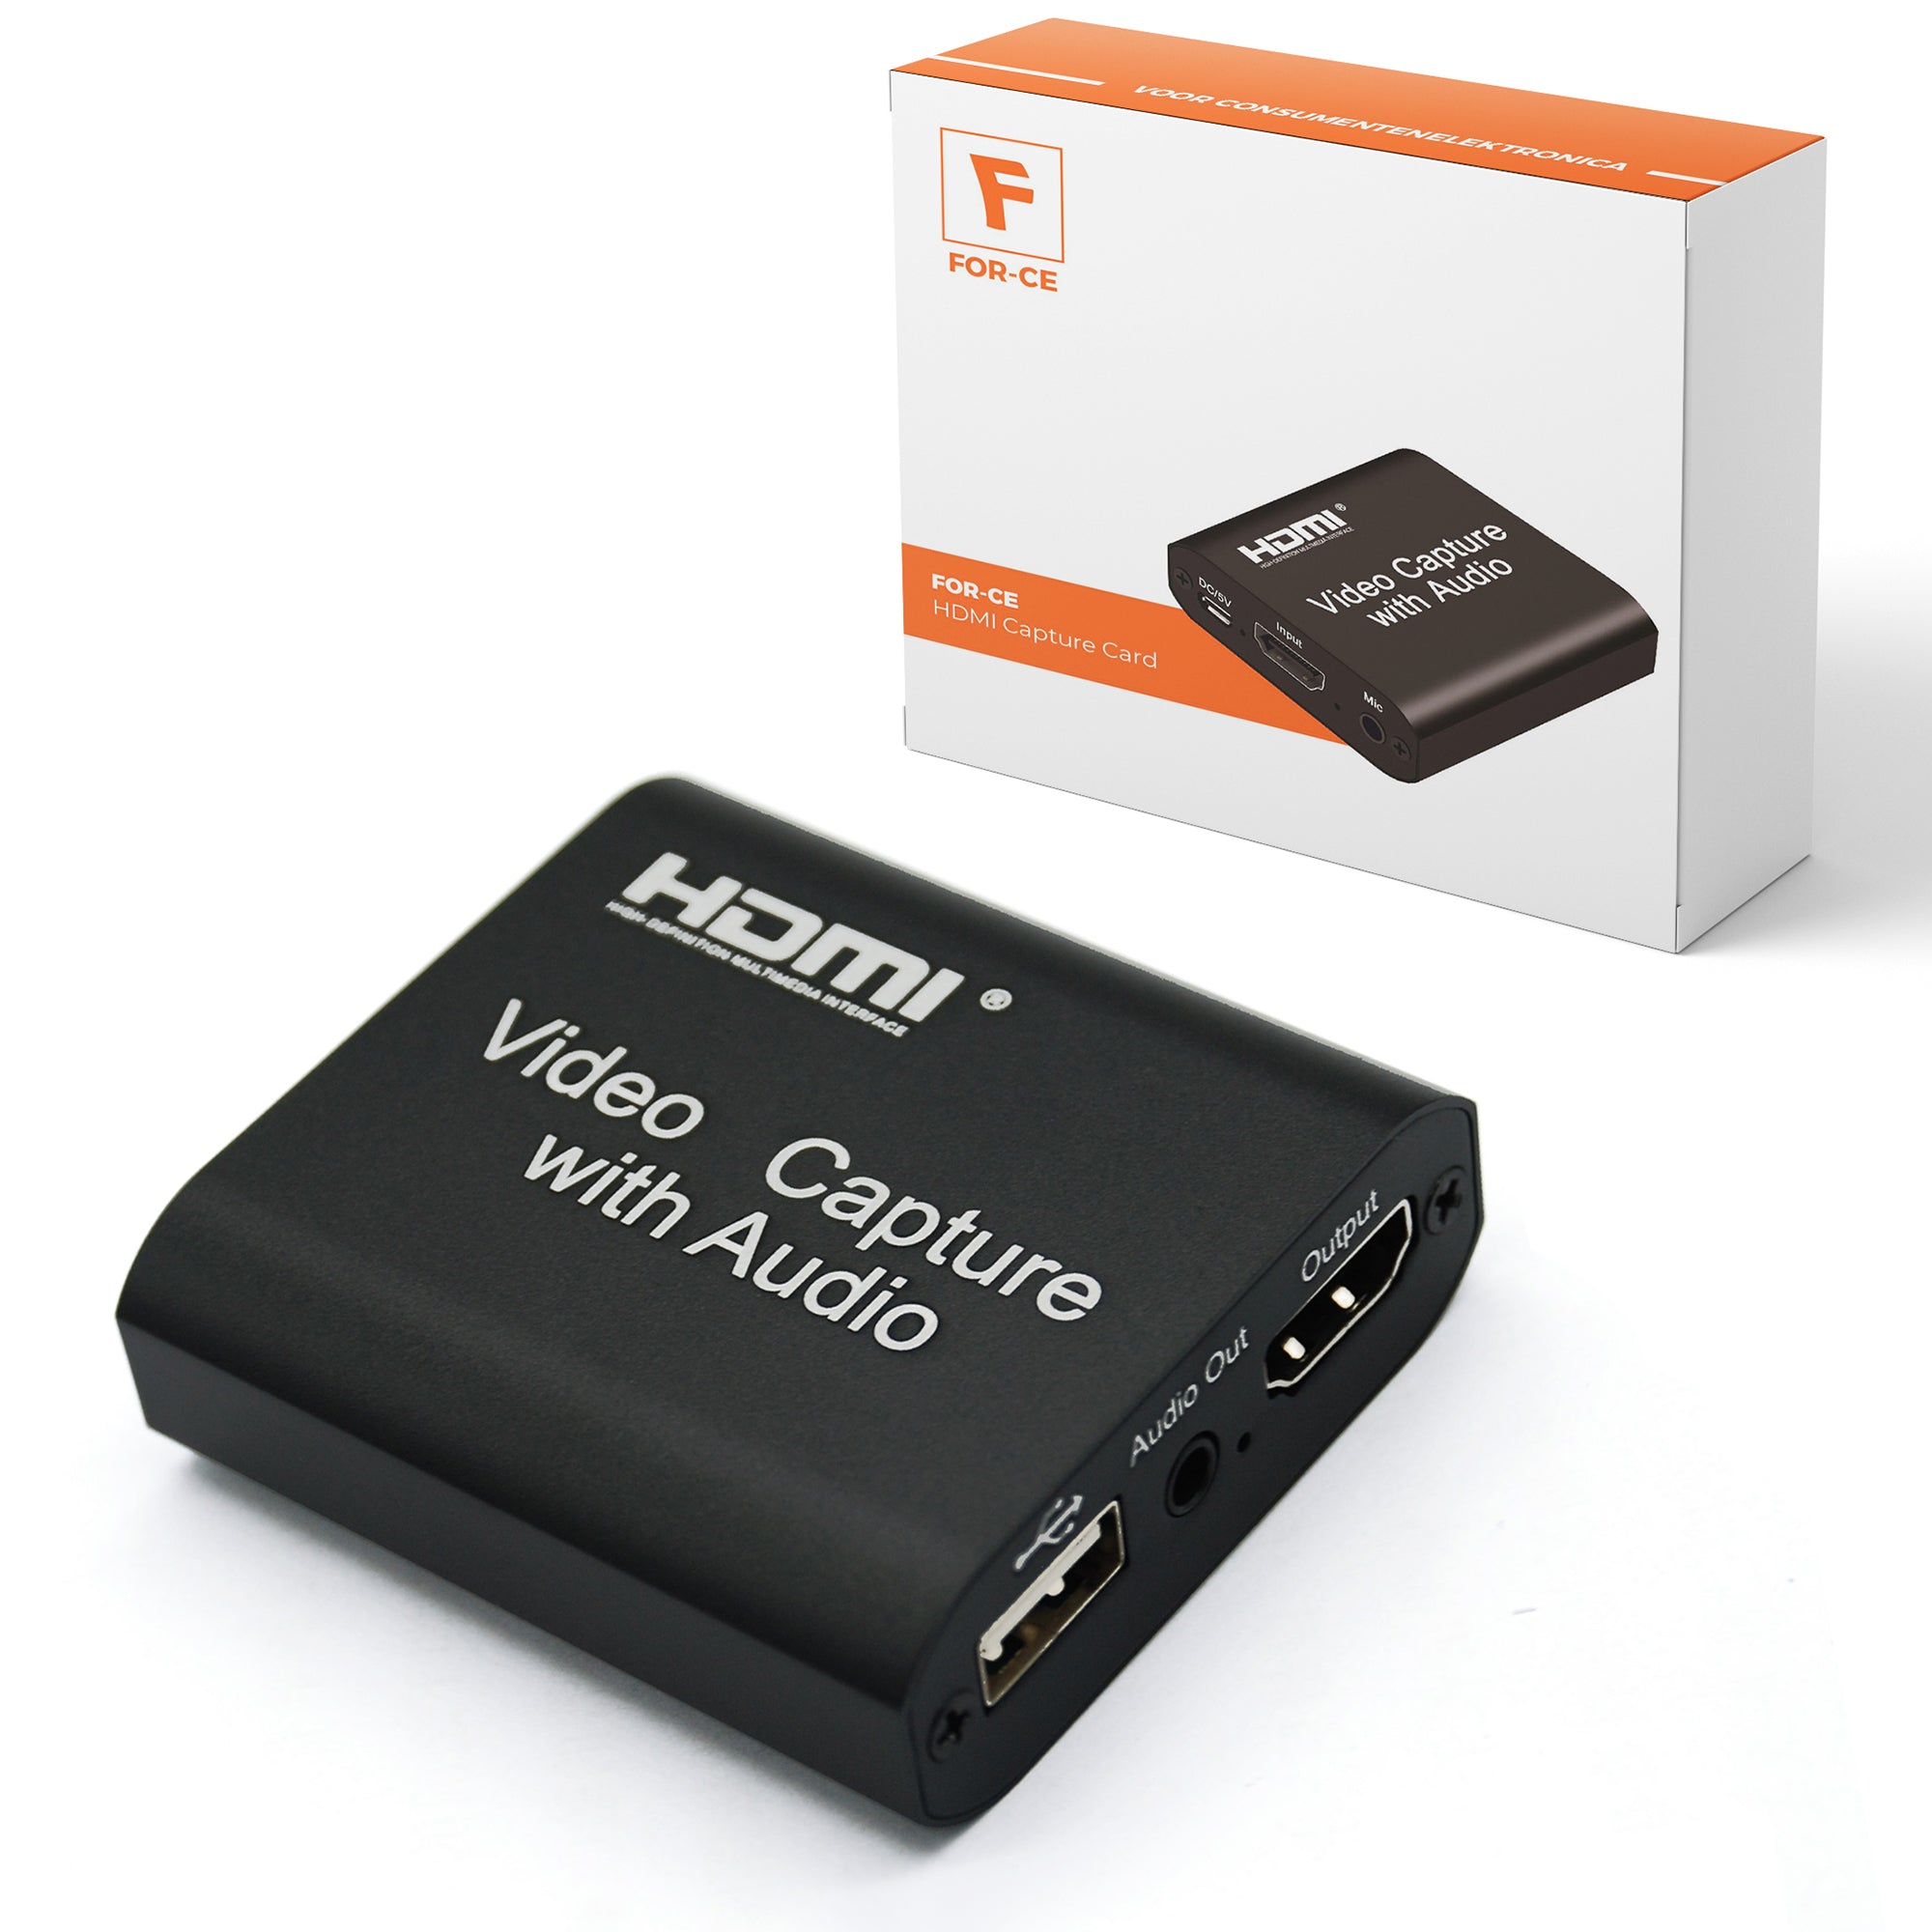 For-ce HDMI Capture Card